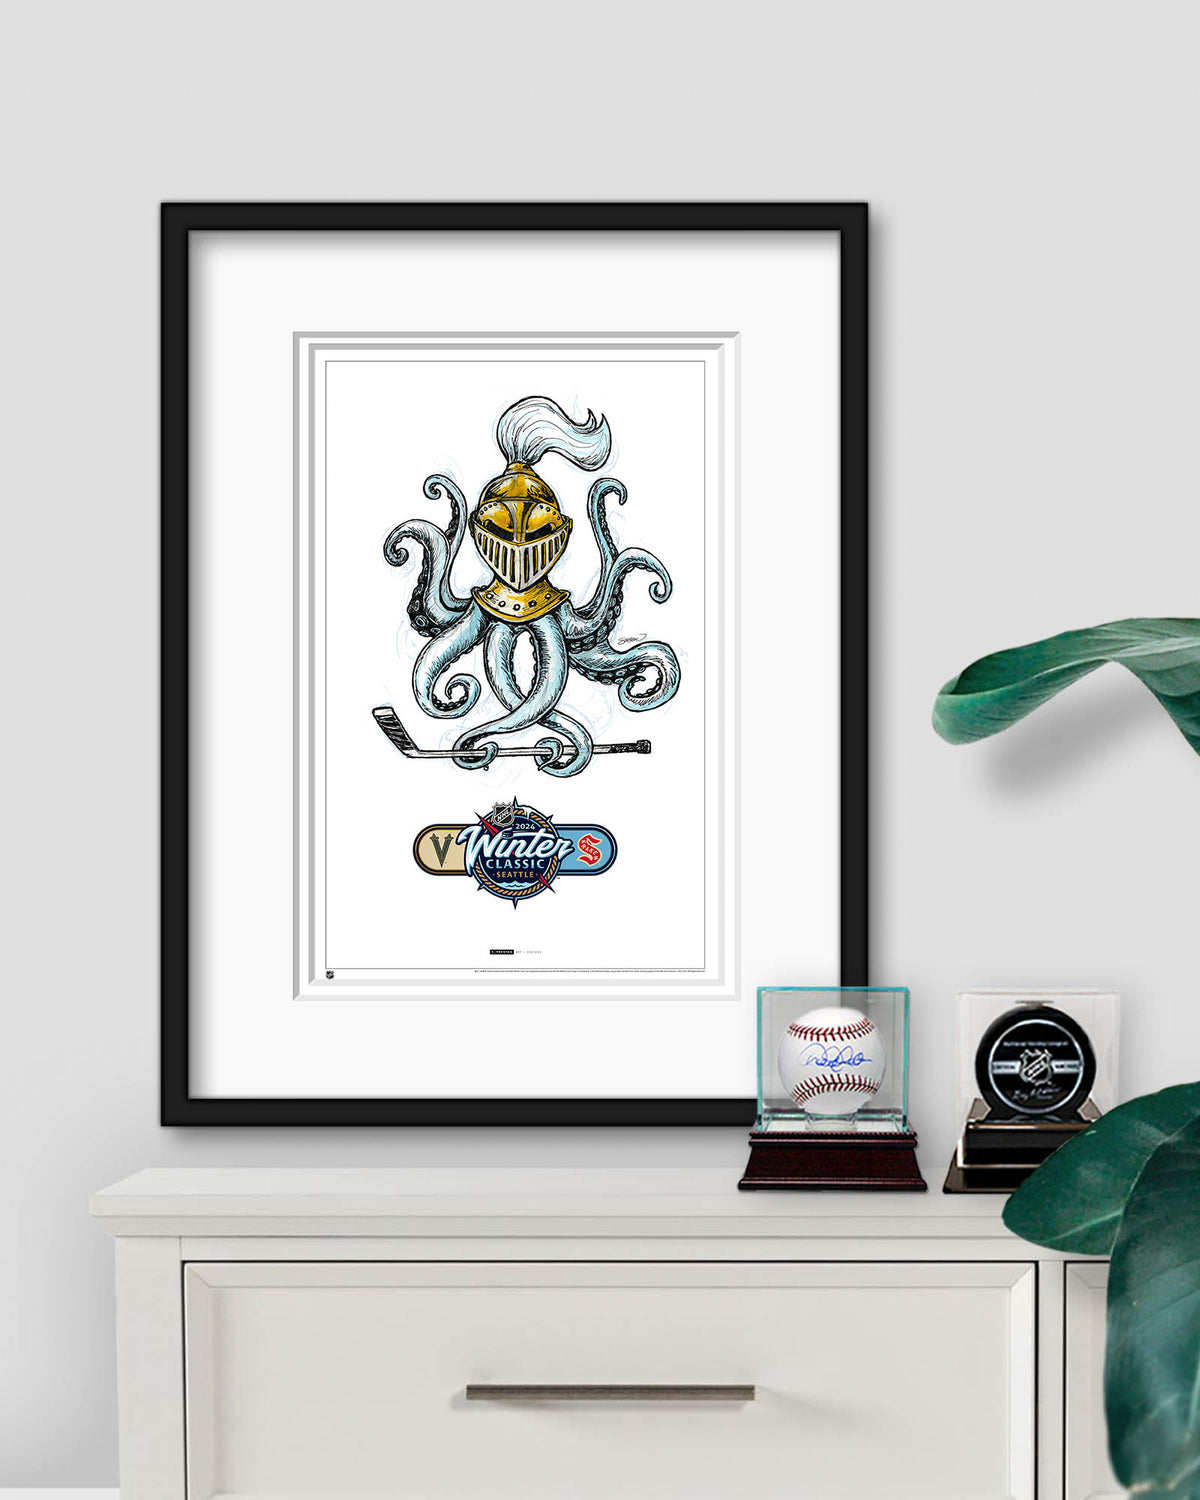 2024 NHL Winter Classic Sketch Limited Edition Art Prints